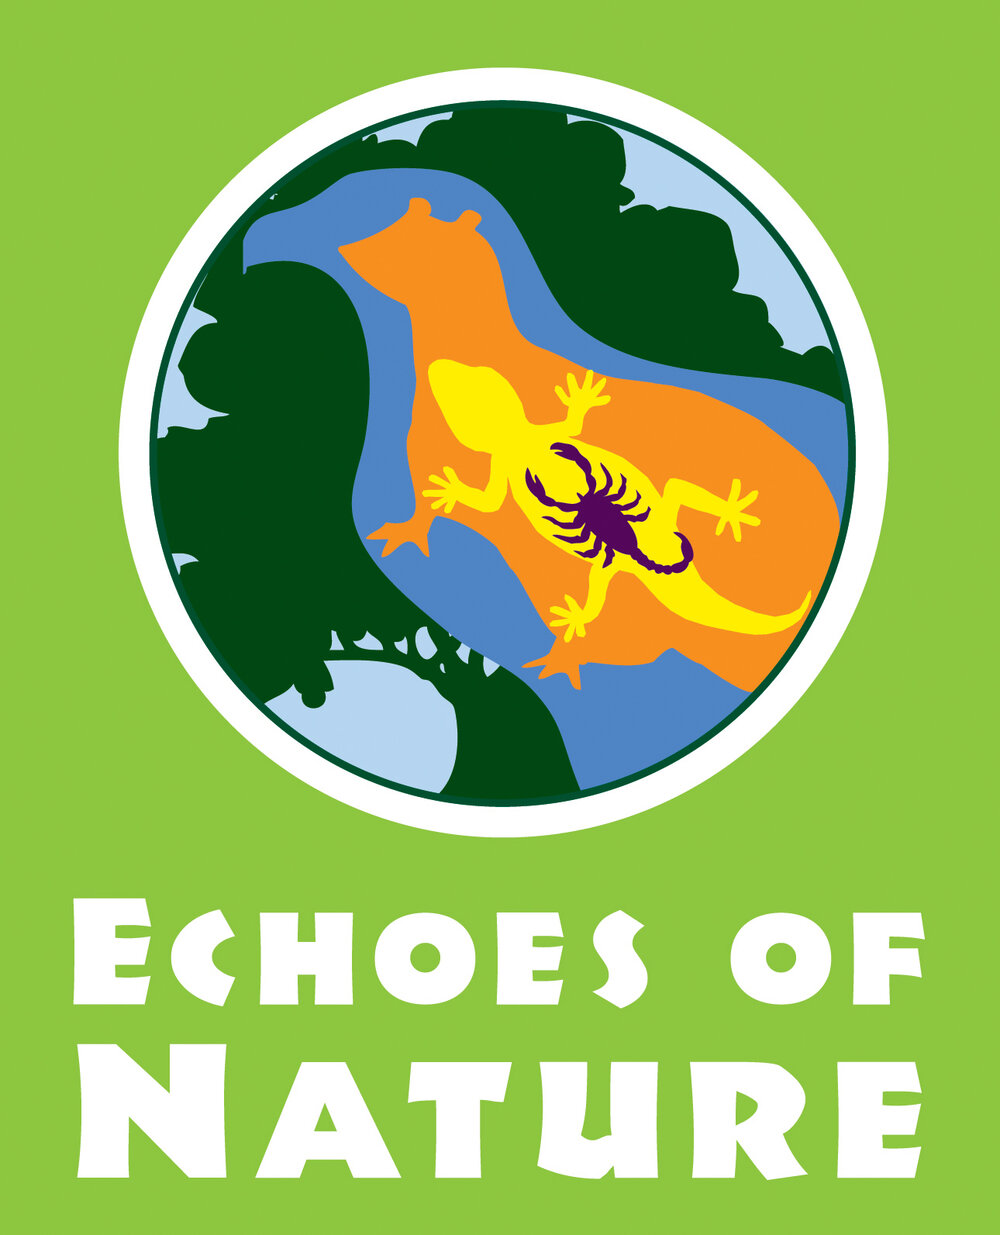 Echoes of nature logo. A green background with a circle in the middle. In the circle, there is tree, eagle. otter, lizard, and scorpion inside. 